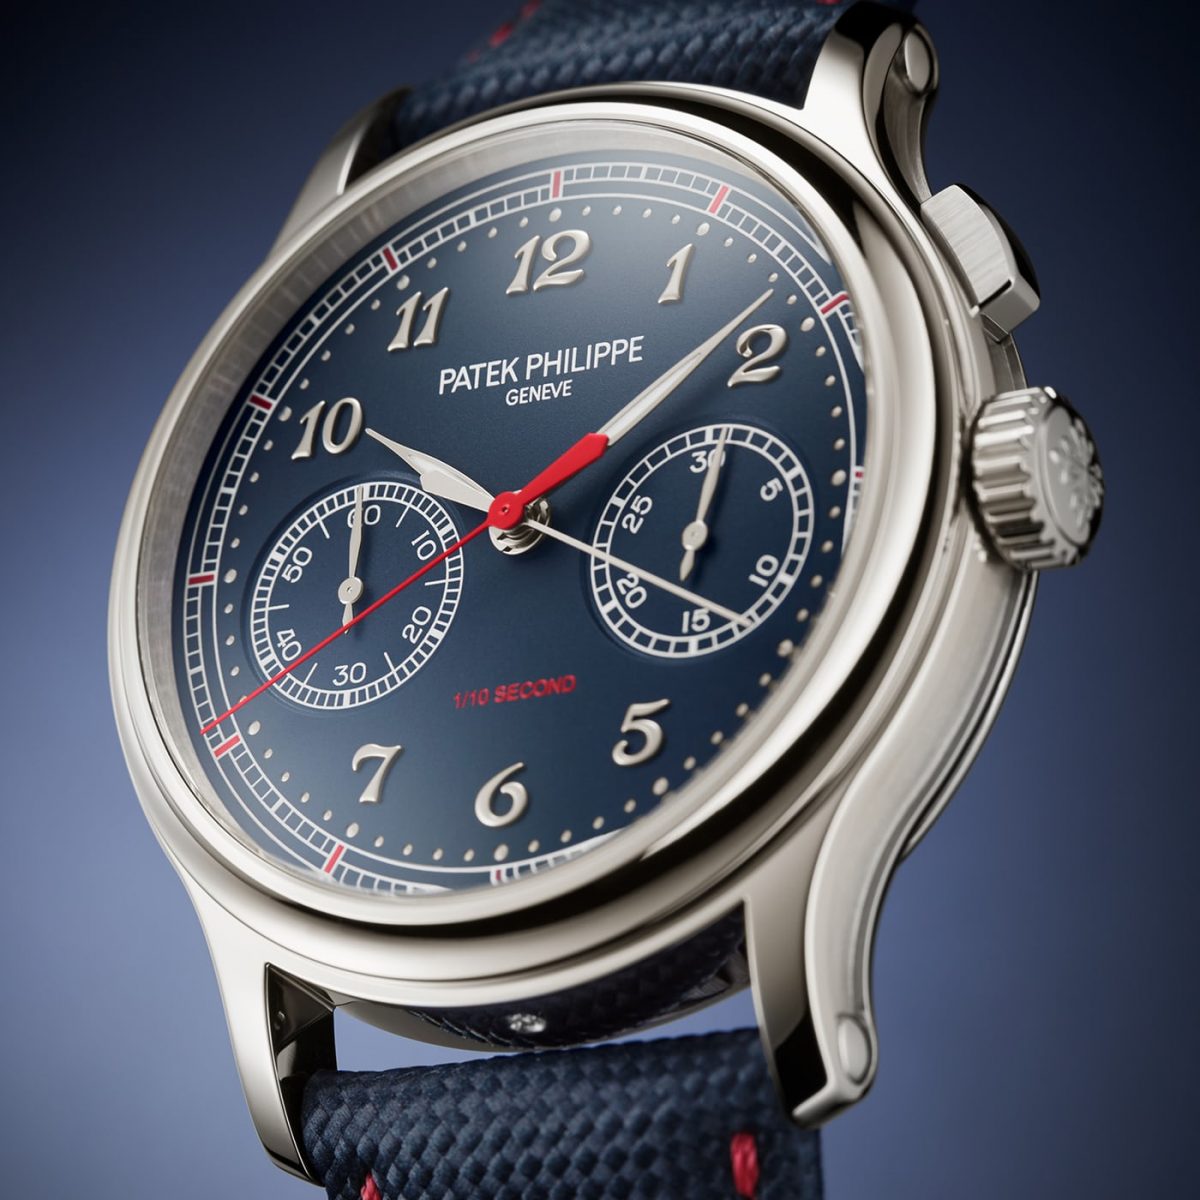 Introducing The UK AAA Replica Patek Ref. 5470P-001 1/10th Second Monopusher Chronograph Is A Fast-Beat First